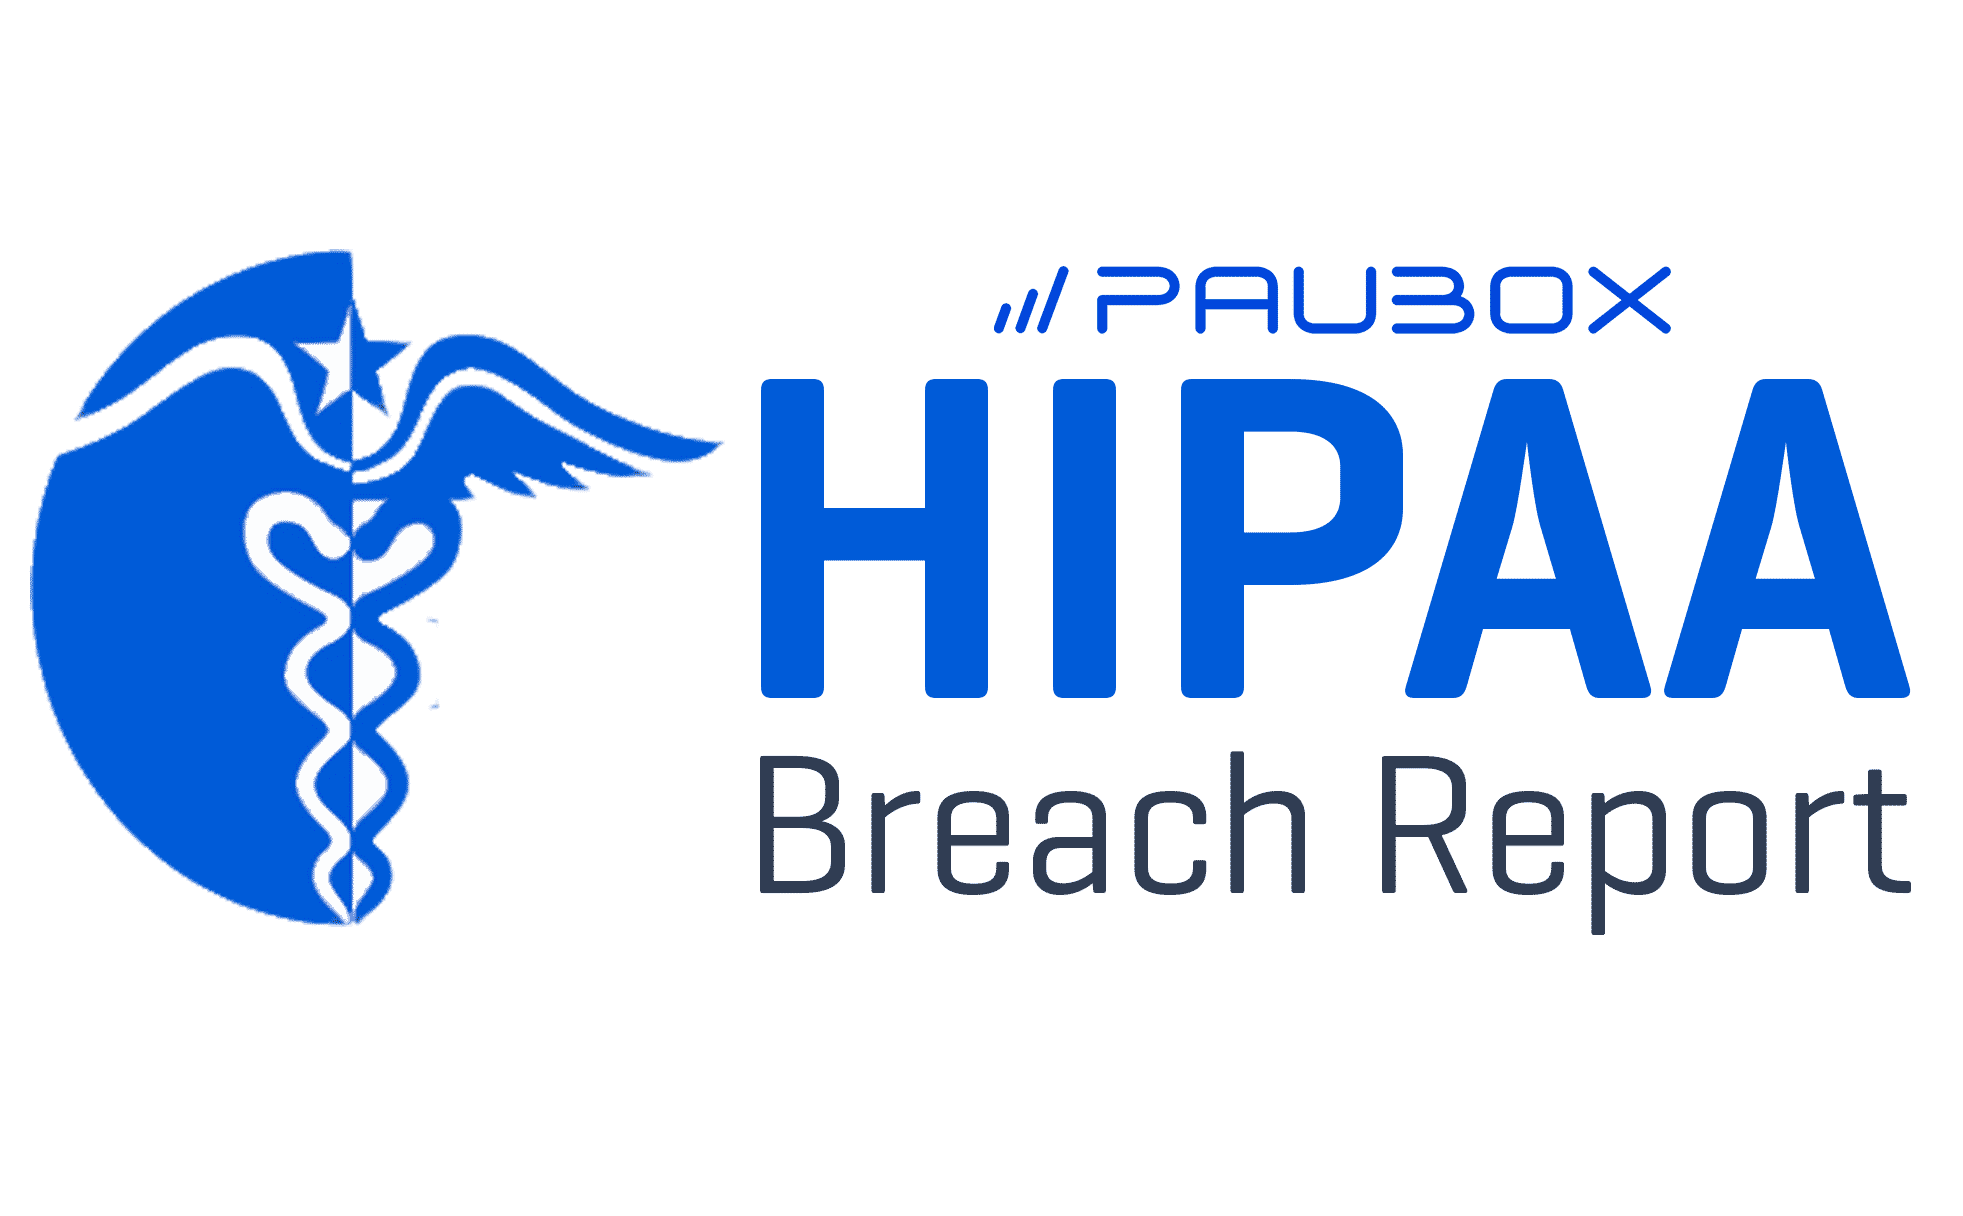 Lifespan health system pays over $1M for HIPAA breach